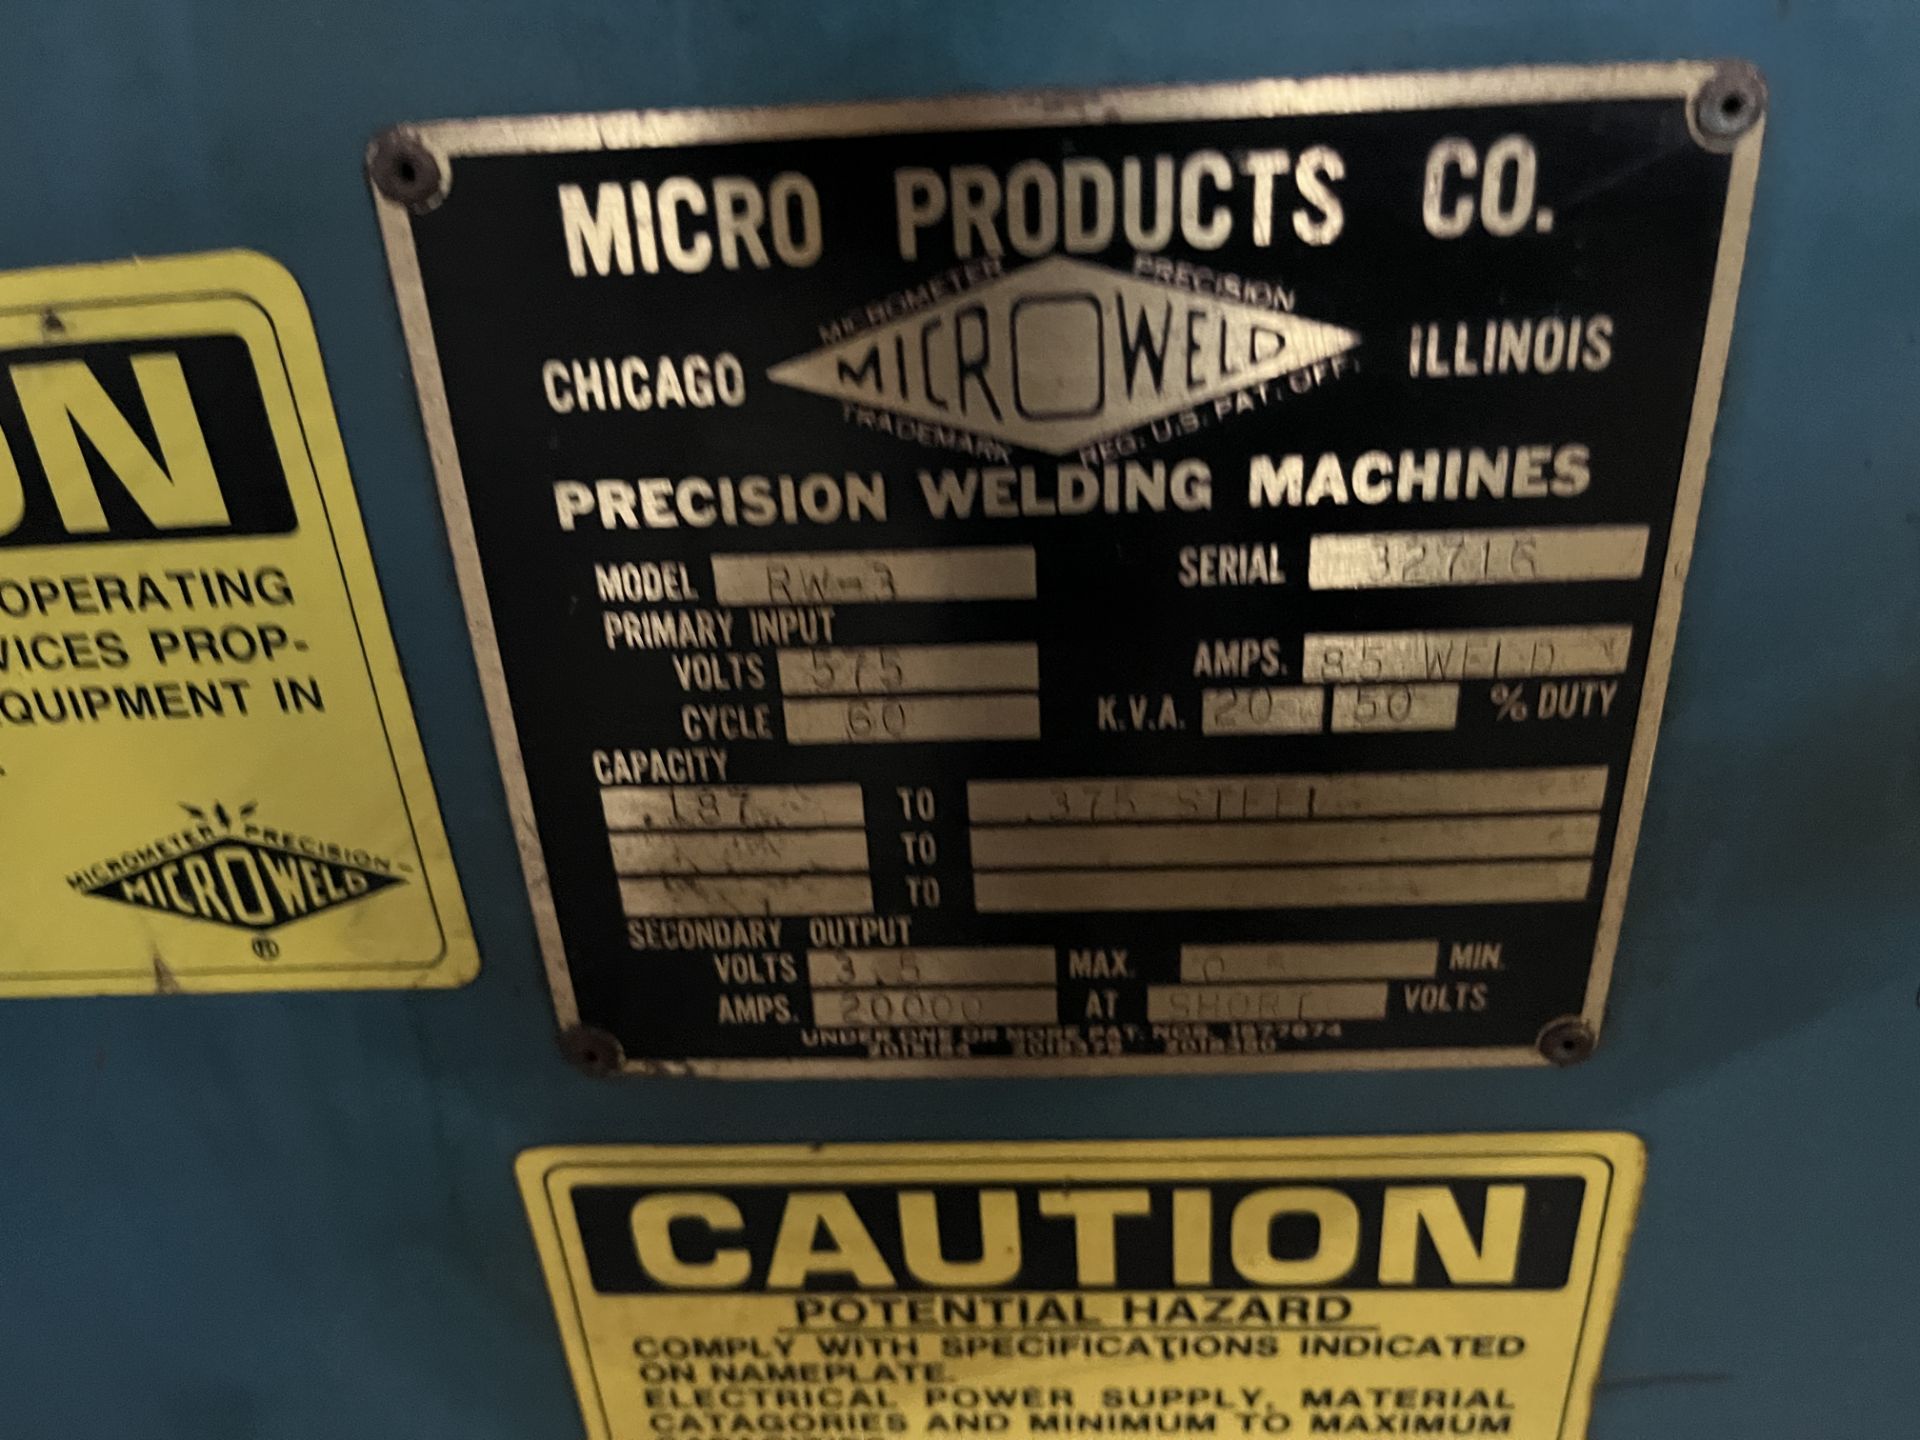 MICRO PRODUCTS RW-3 PRECISION SPOT WELDER, 20 KVA, S/N 32716 (RIGGING FEE $100) - Image 4 of 4